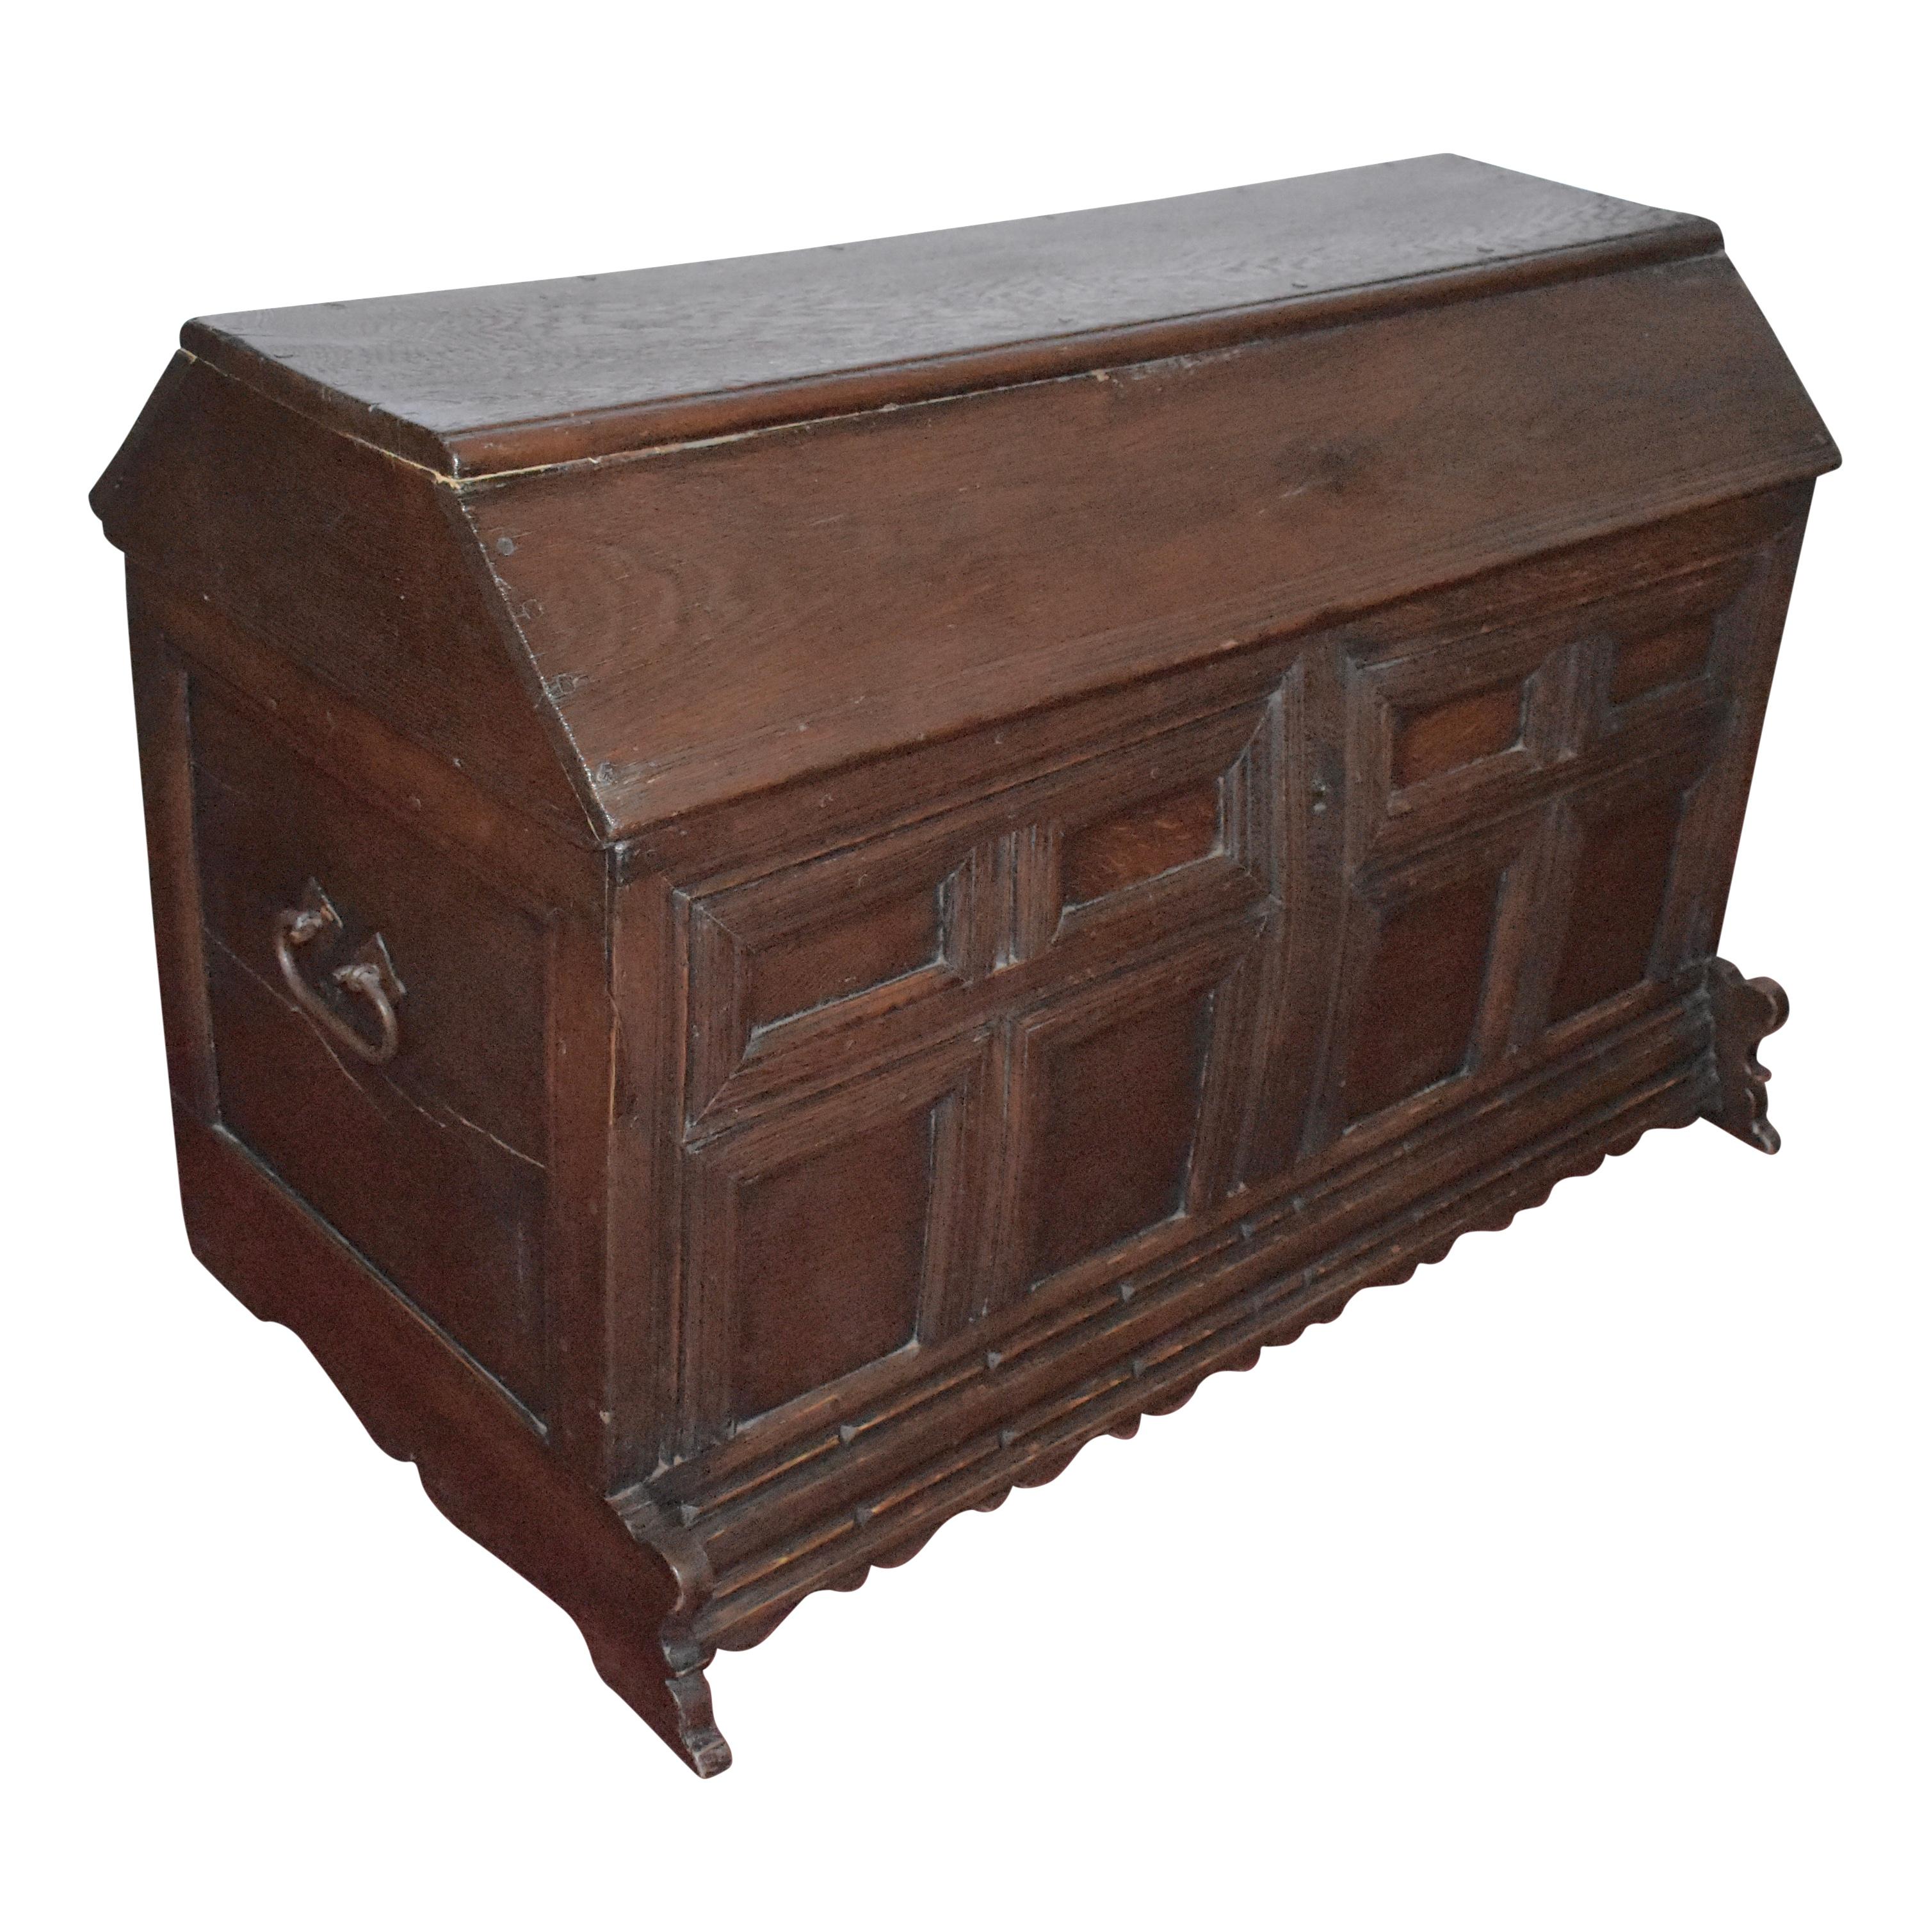 Featuring a dark stain, front recessed panels, and iron loop handles this versatile trunk has generous storage and a unique top, which once served as a saddle stand. Shaped feet and a scalloped front apron add visual interest to the trunk's simple